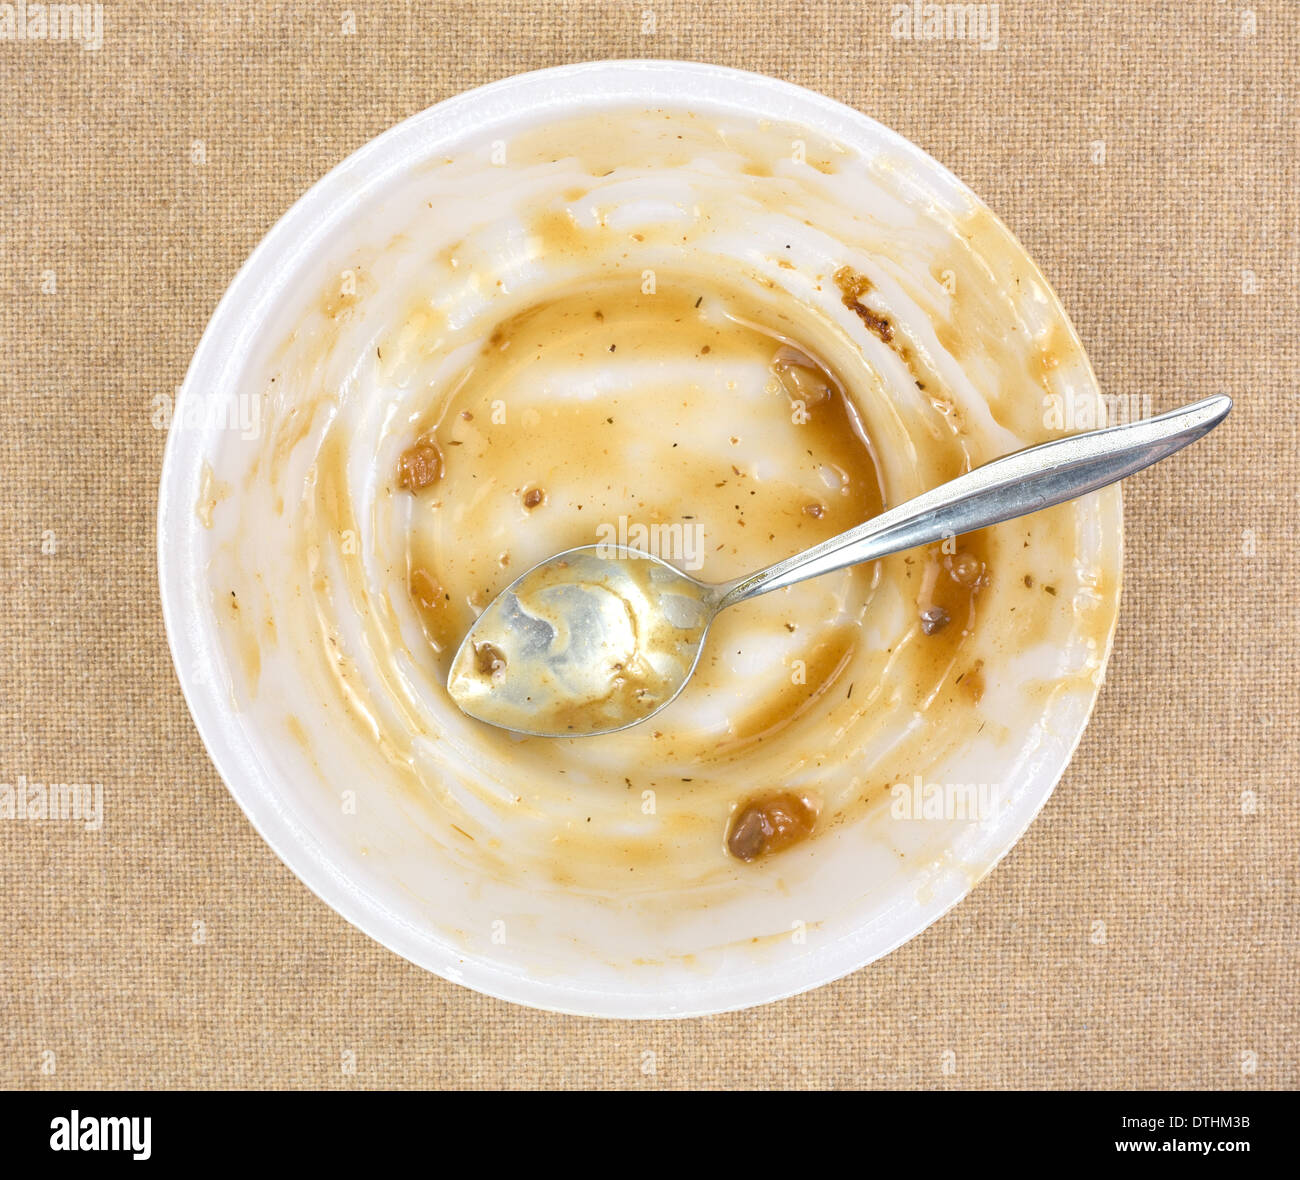 Top view of a finished TV dinner bowl with a spoon on a cloth background. Stock Photo